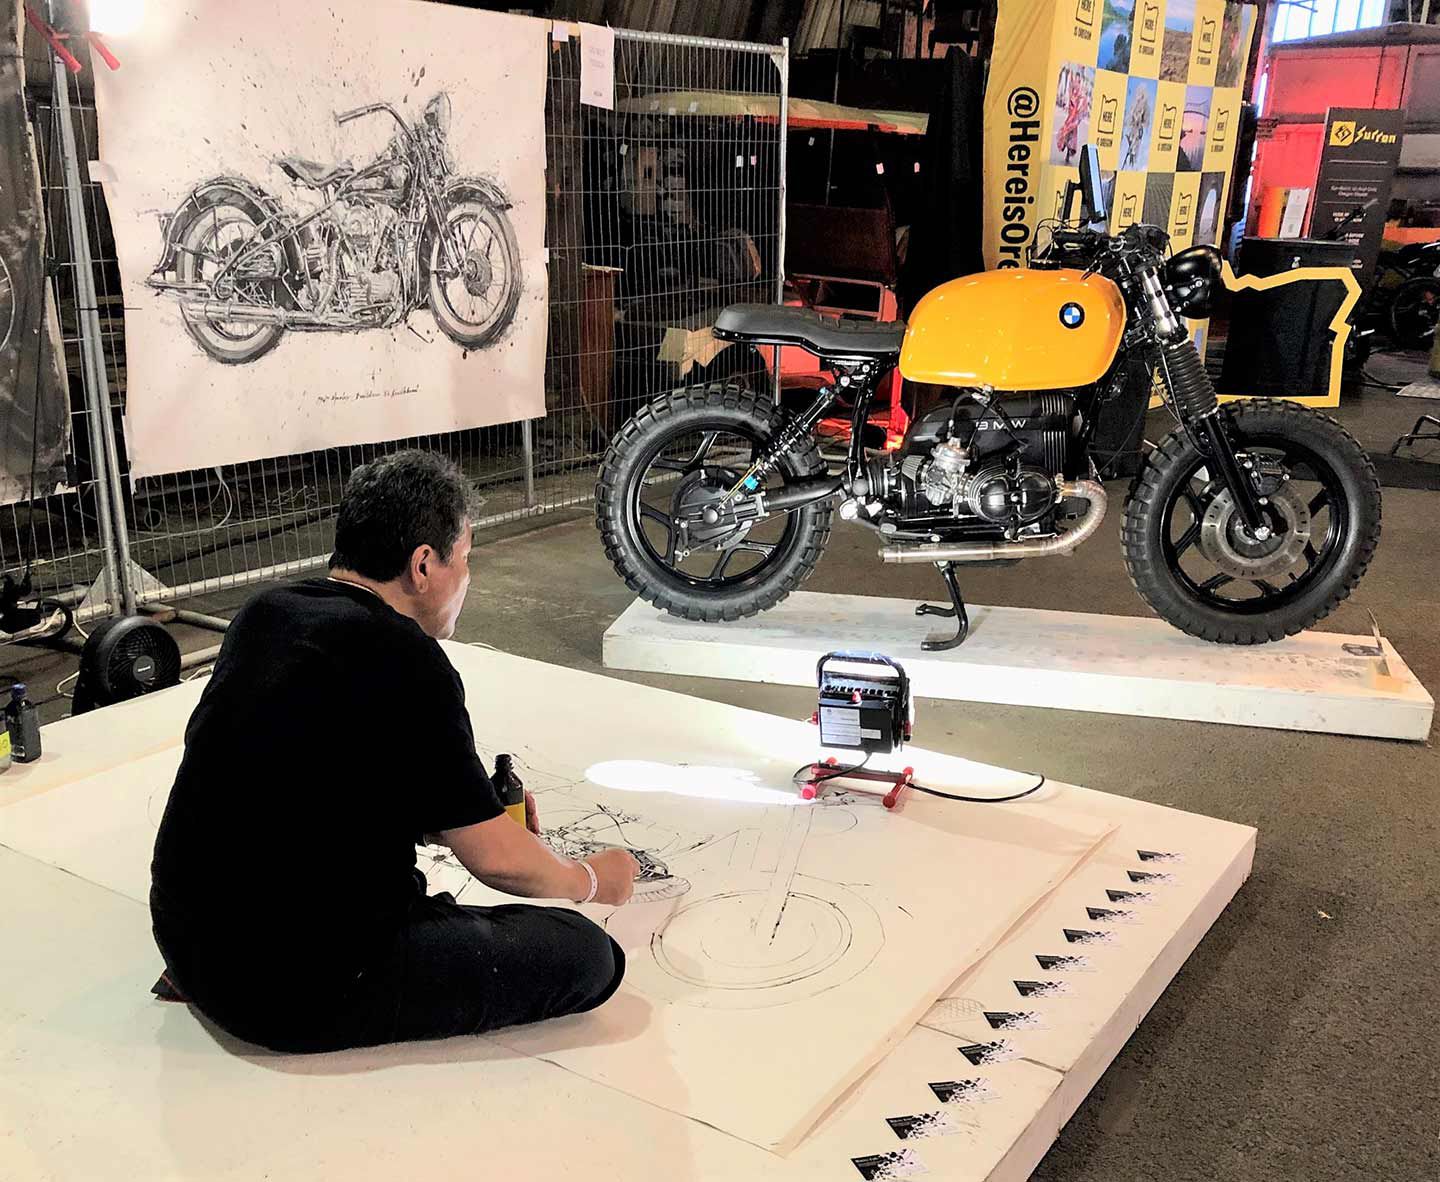 A show regular, Makato Endo was spotted doing his trademark painting with India ink and chopsticks at the back area. This year’s subject was a 1995 BMW R100.